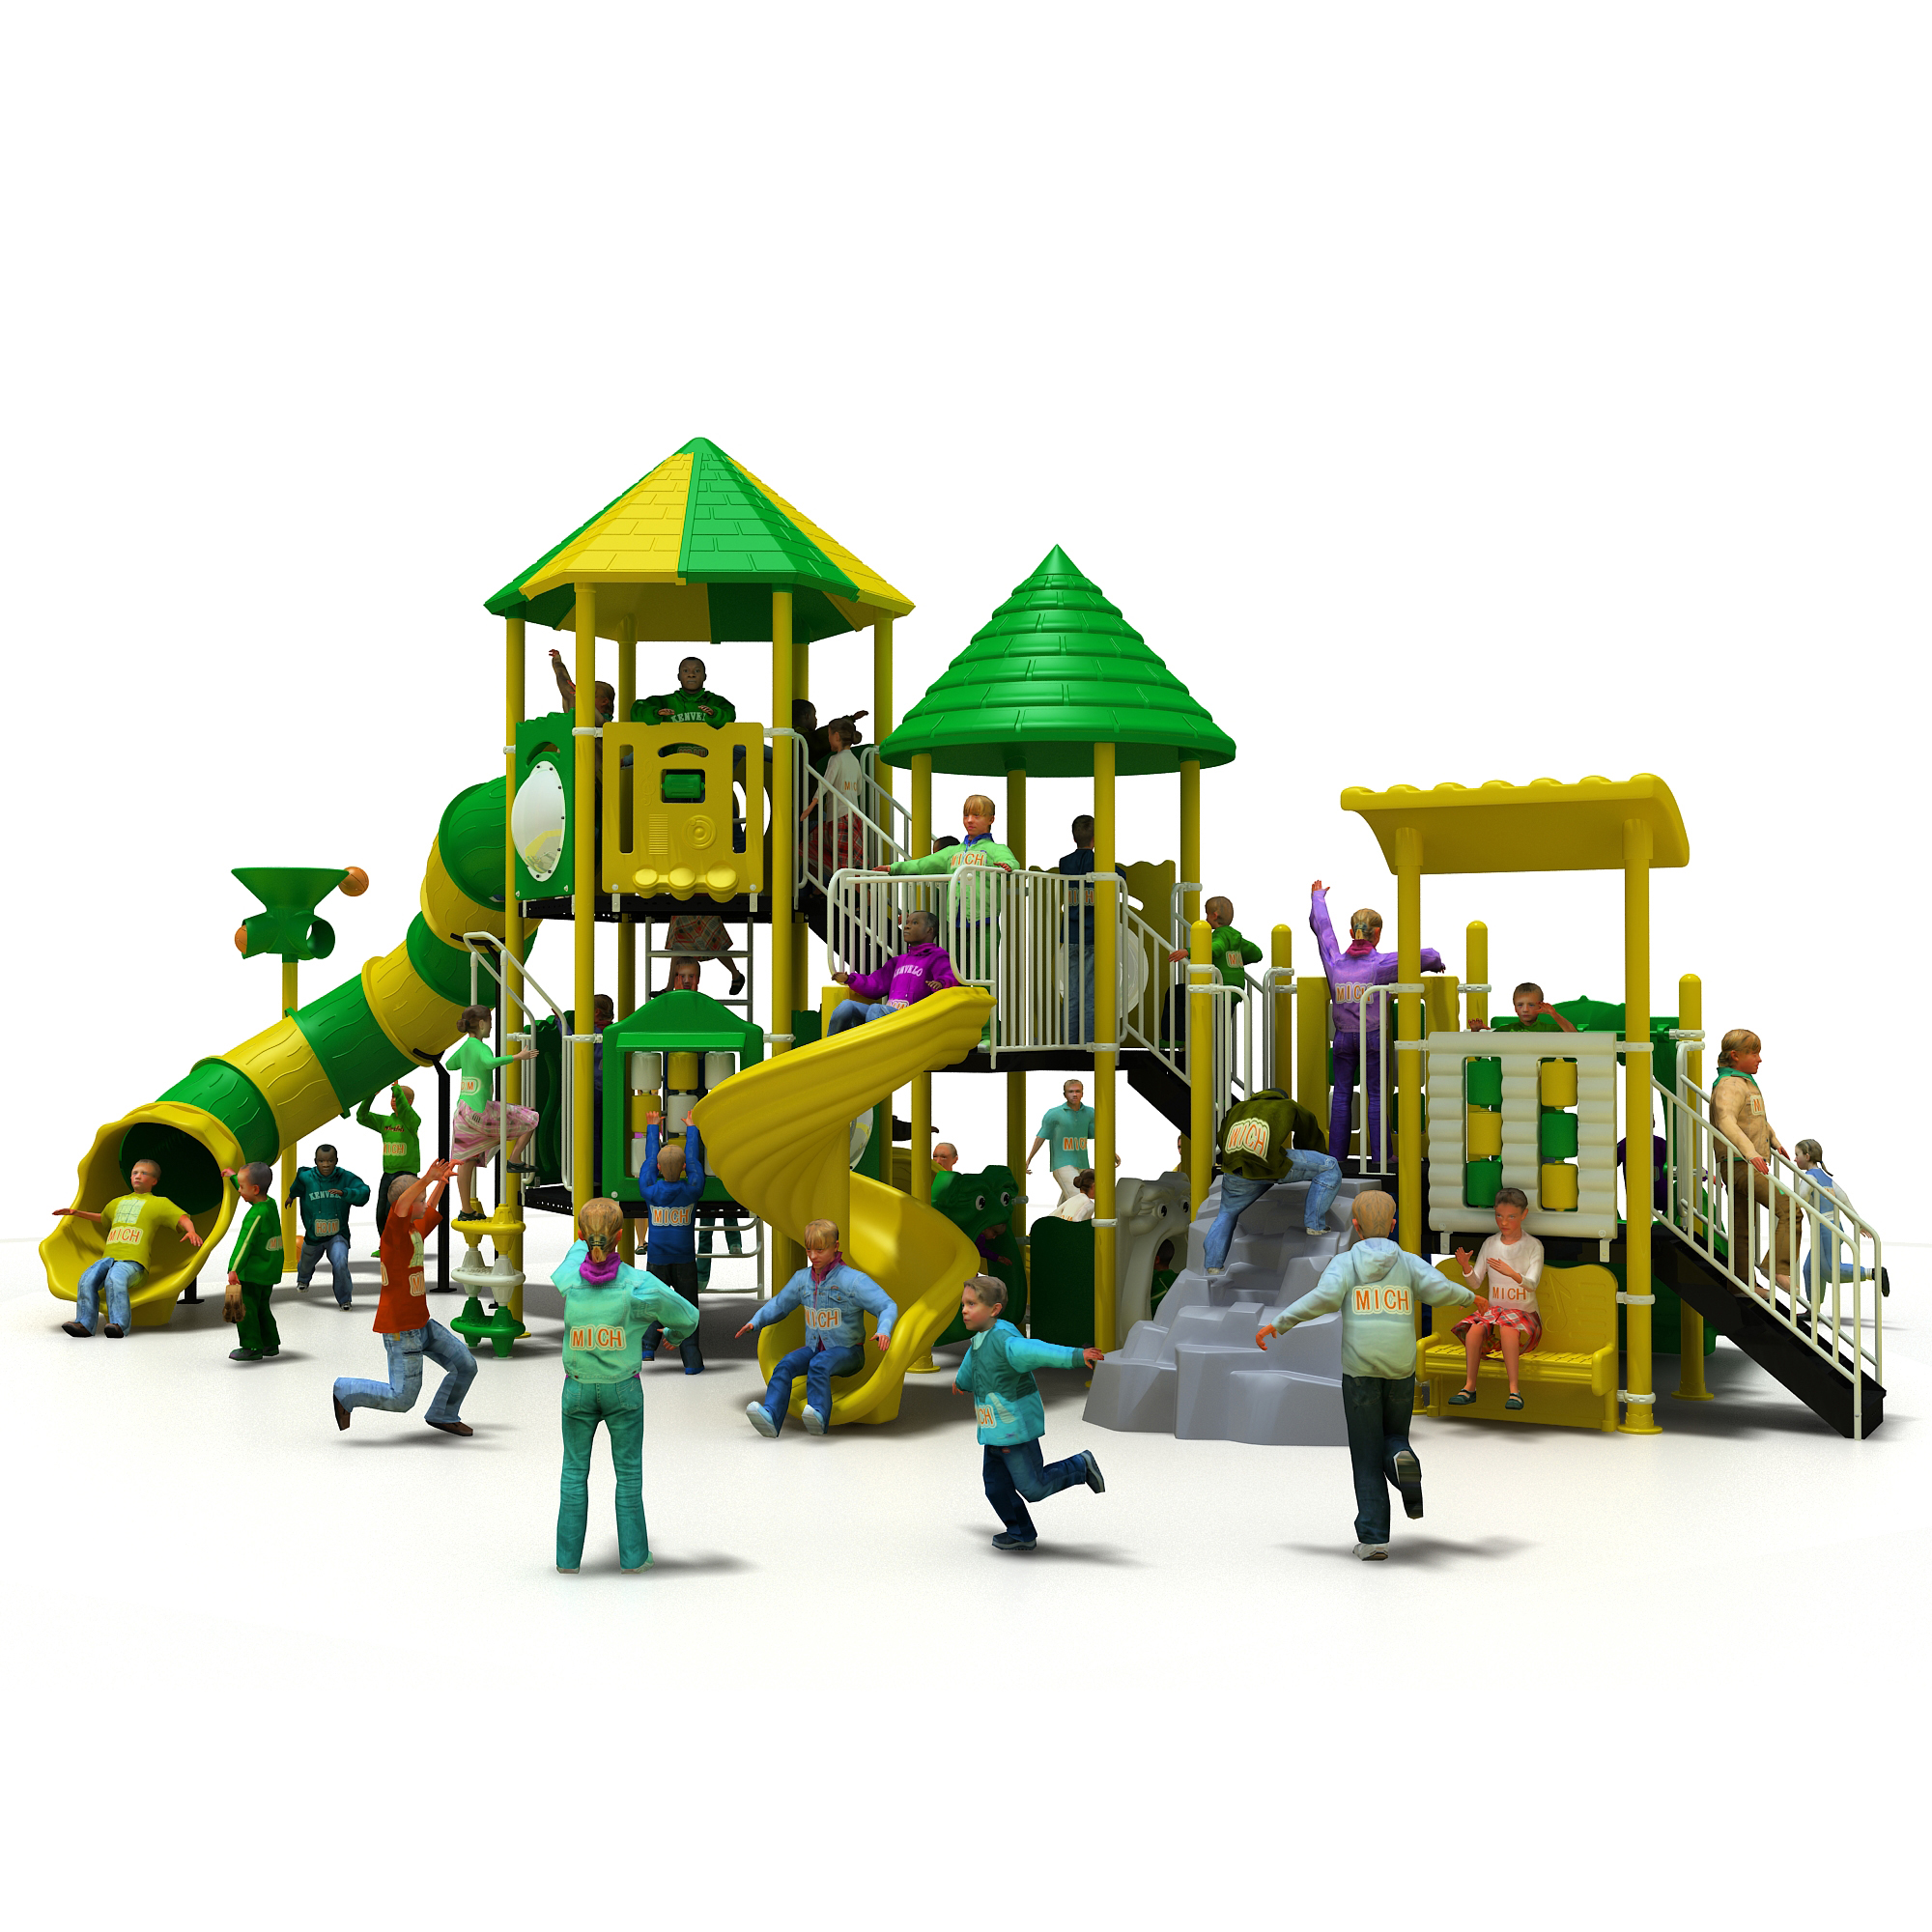 The Insider's Guide to Outdoor playgrounds